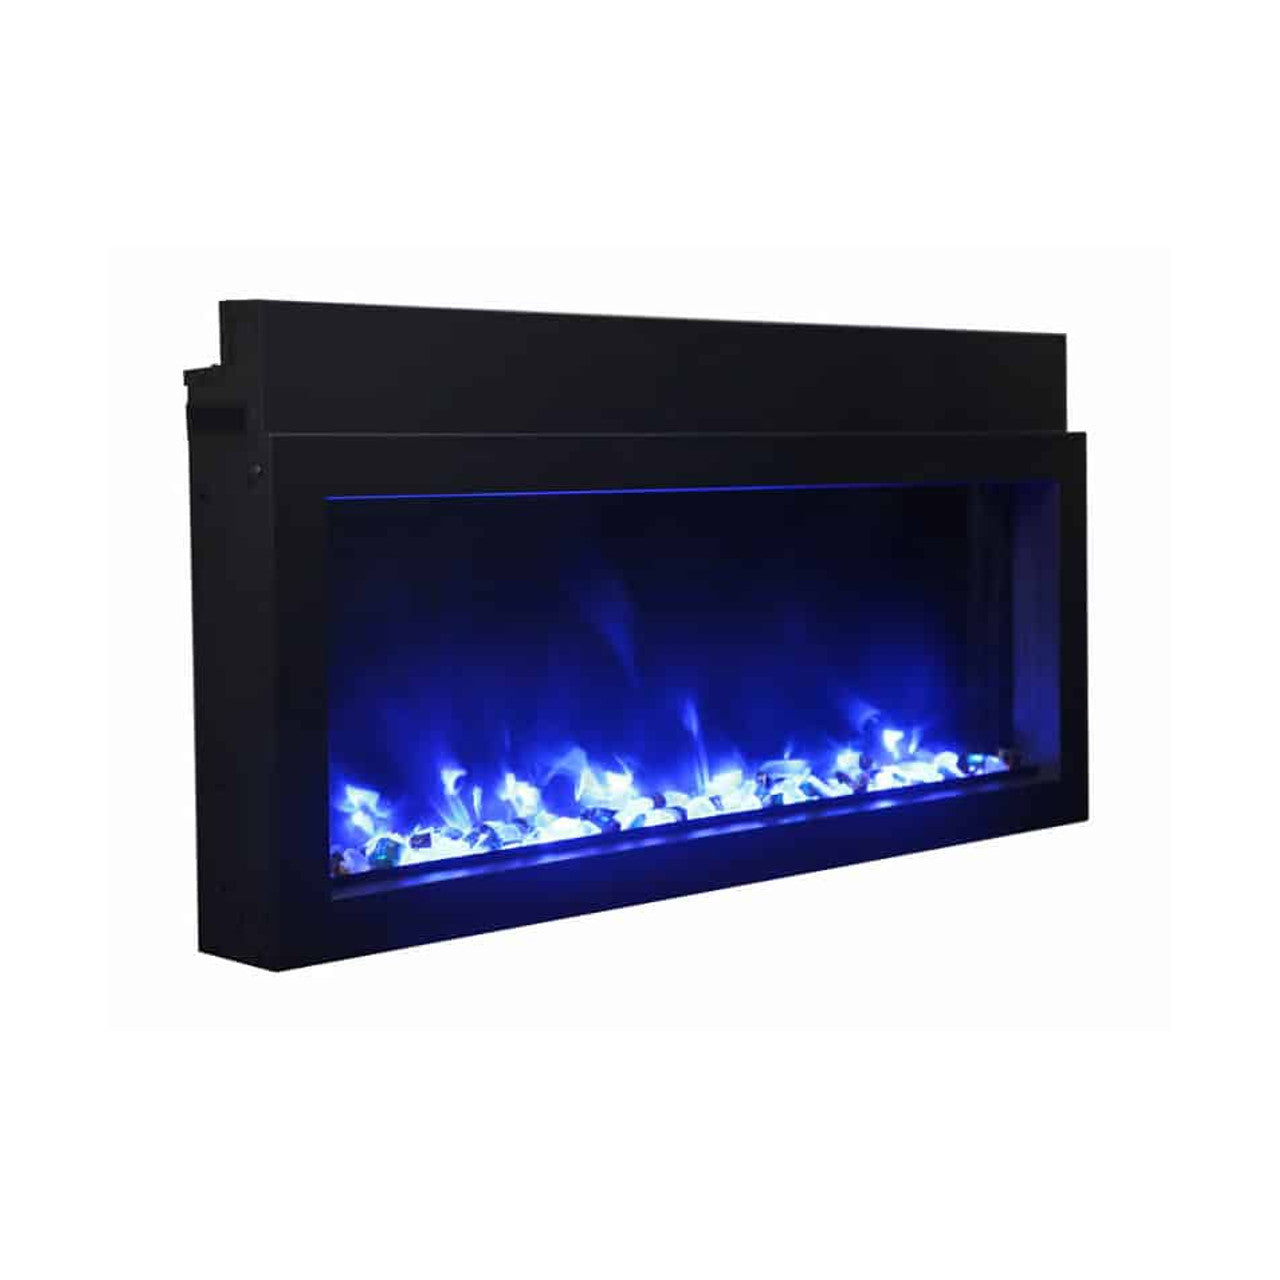 Amantii 50" Panorama Extra Slim Electric Fireplace -BI-50-XTRASLIM- Right Facing With Fire Glass Blue Flame